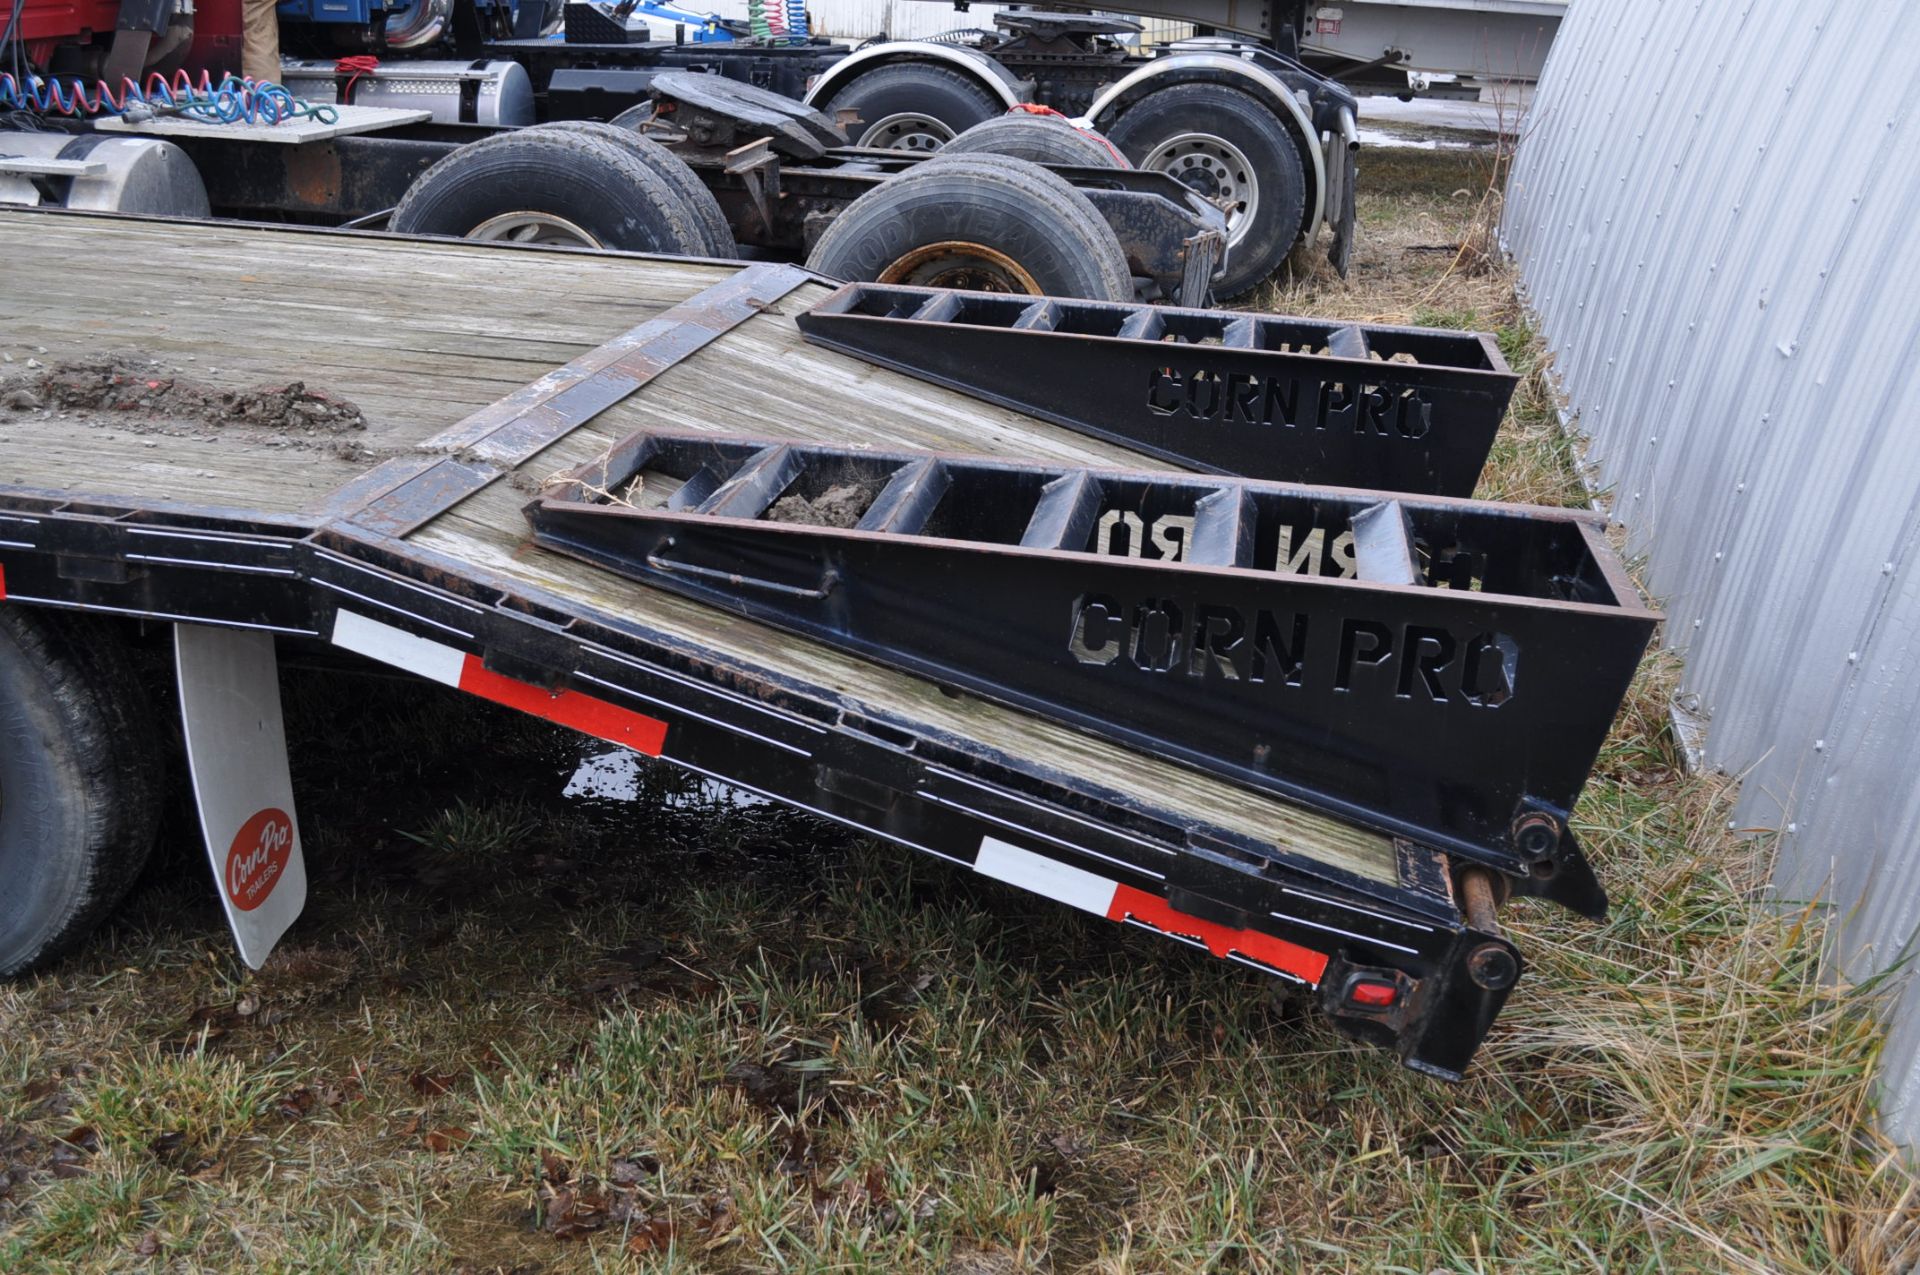 2009 20'+5" Corn Pro Gooseneck Trailer, wedge ramps, 102” wide, front storage compartment - Image 3 of 6